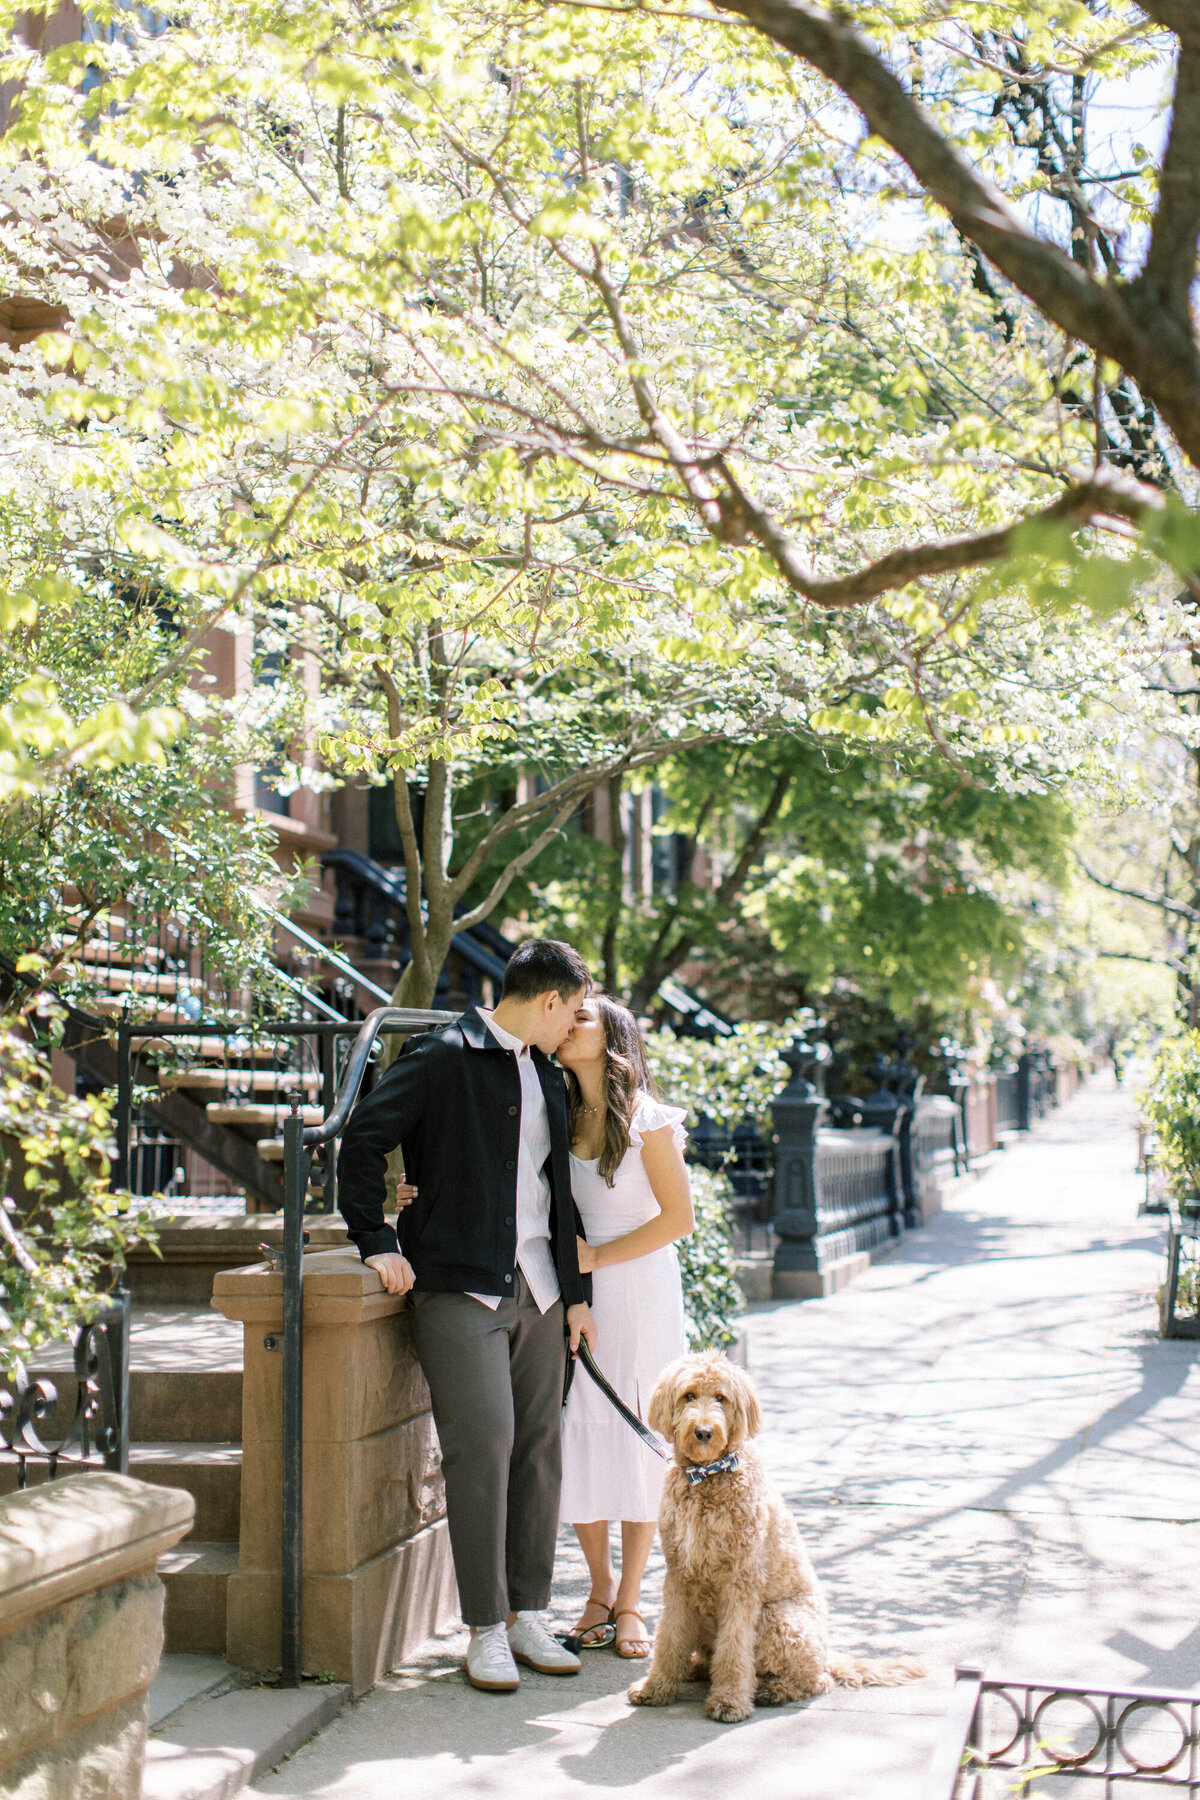 L B P _ Laura & Tony _ Central Park Engagement Session _ NYC Engagement Photos _ New York City Wedding Photographer _ Atlanta Engagement Photographer-191